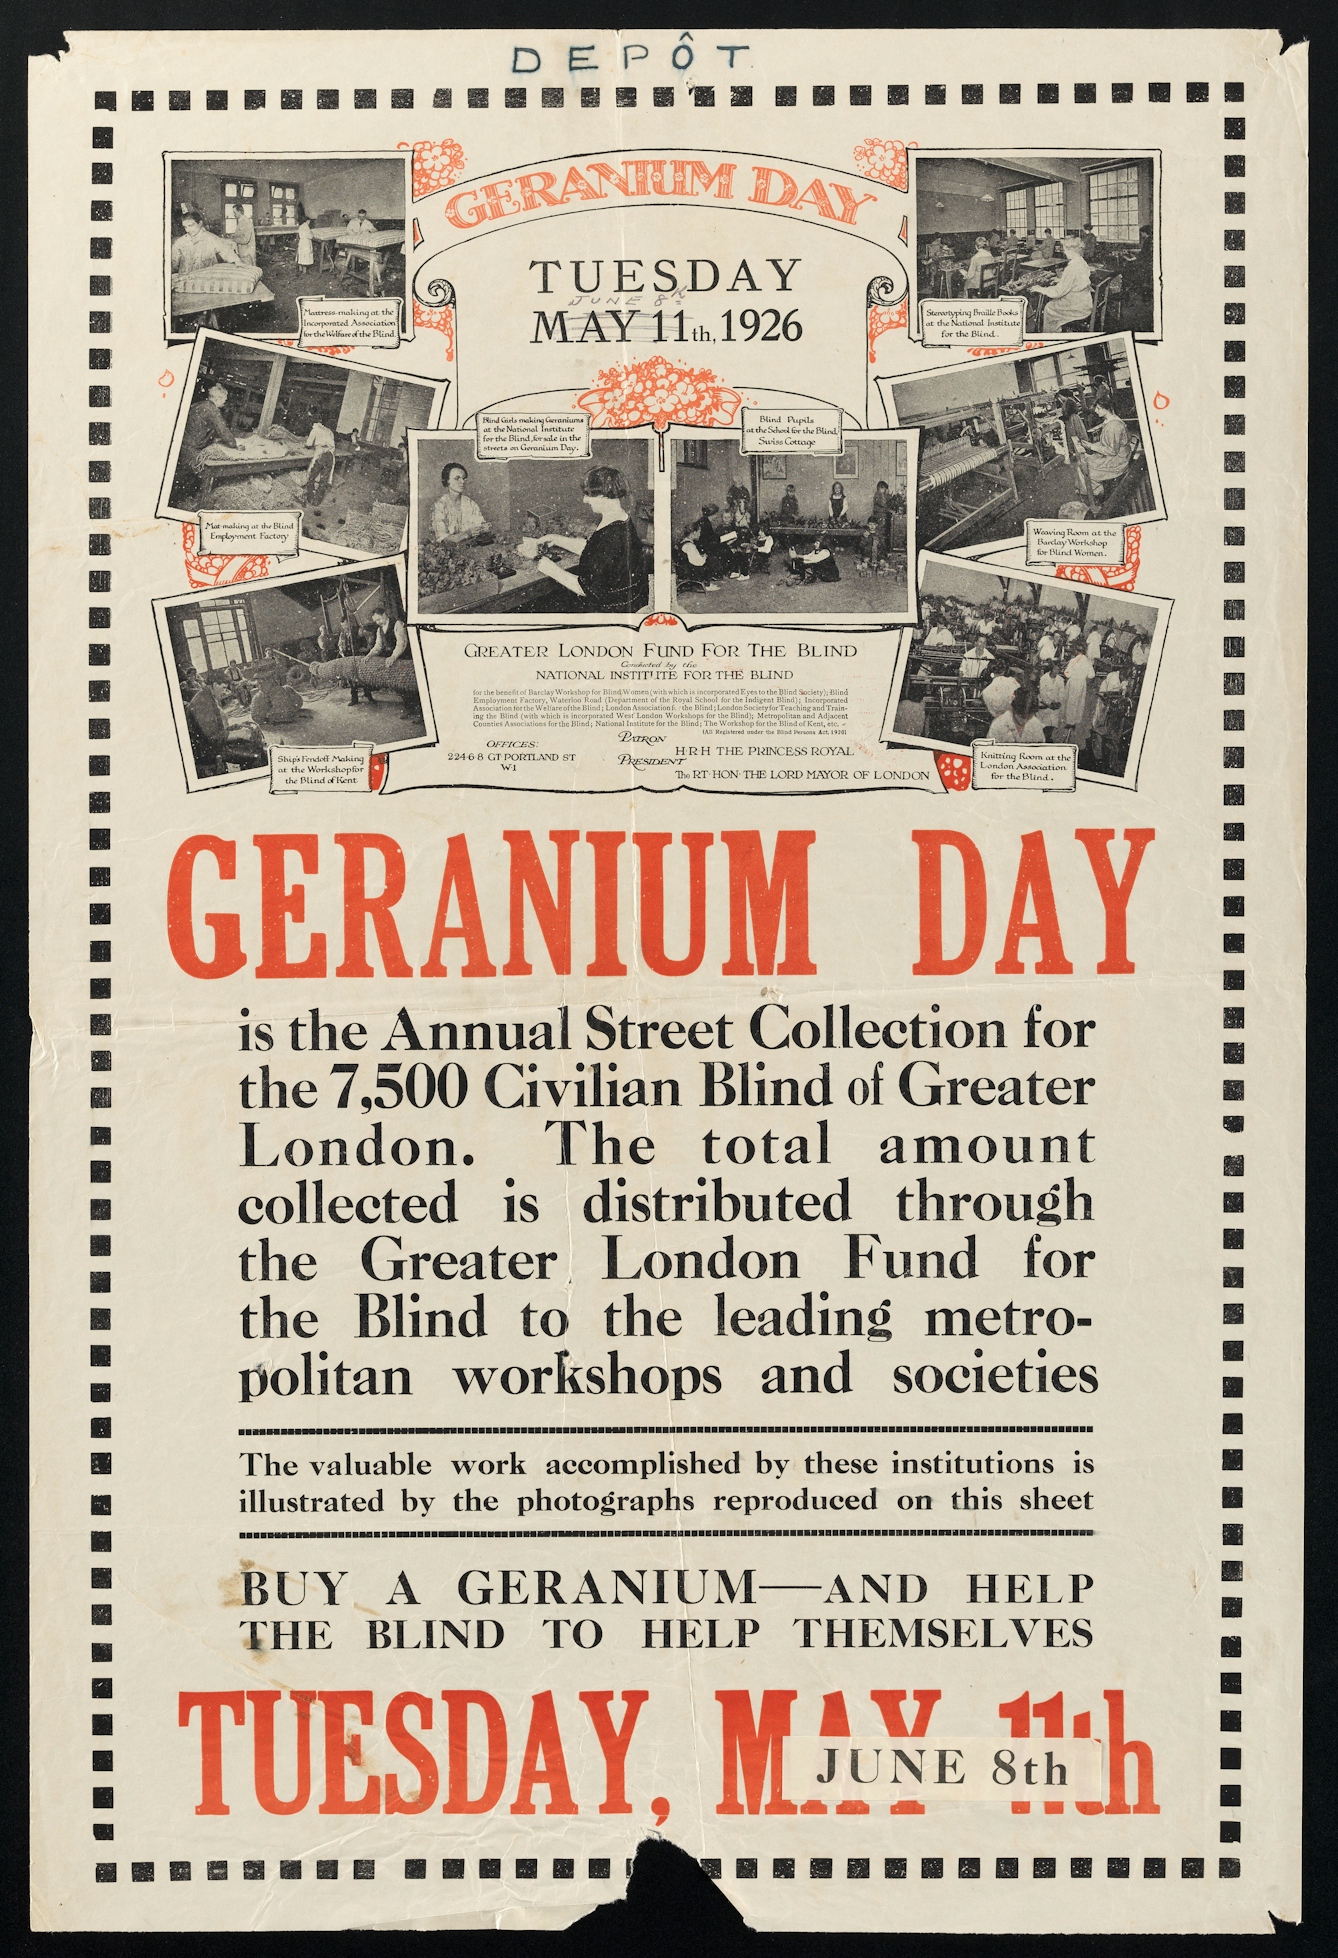 A promotional poster from 1926 for 'Geranium Day', featuring black and red typography and a selection of small black and white photographs. Part of the text reads, "Buy a geranium - and help the blind to help themselves'.